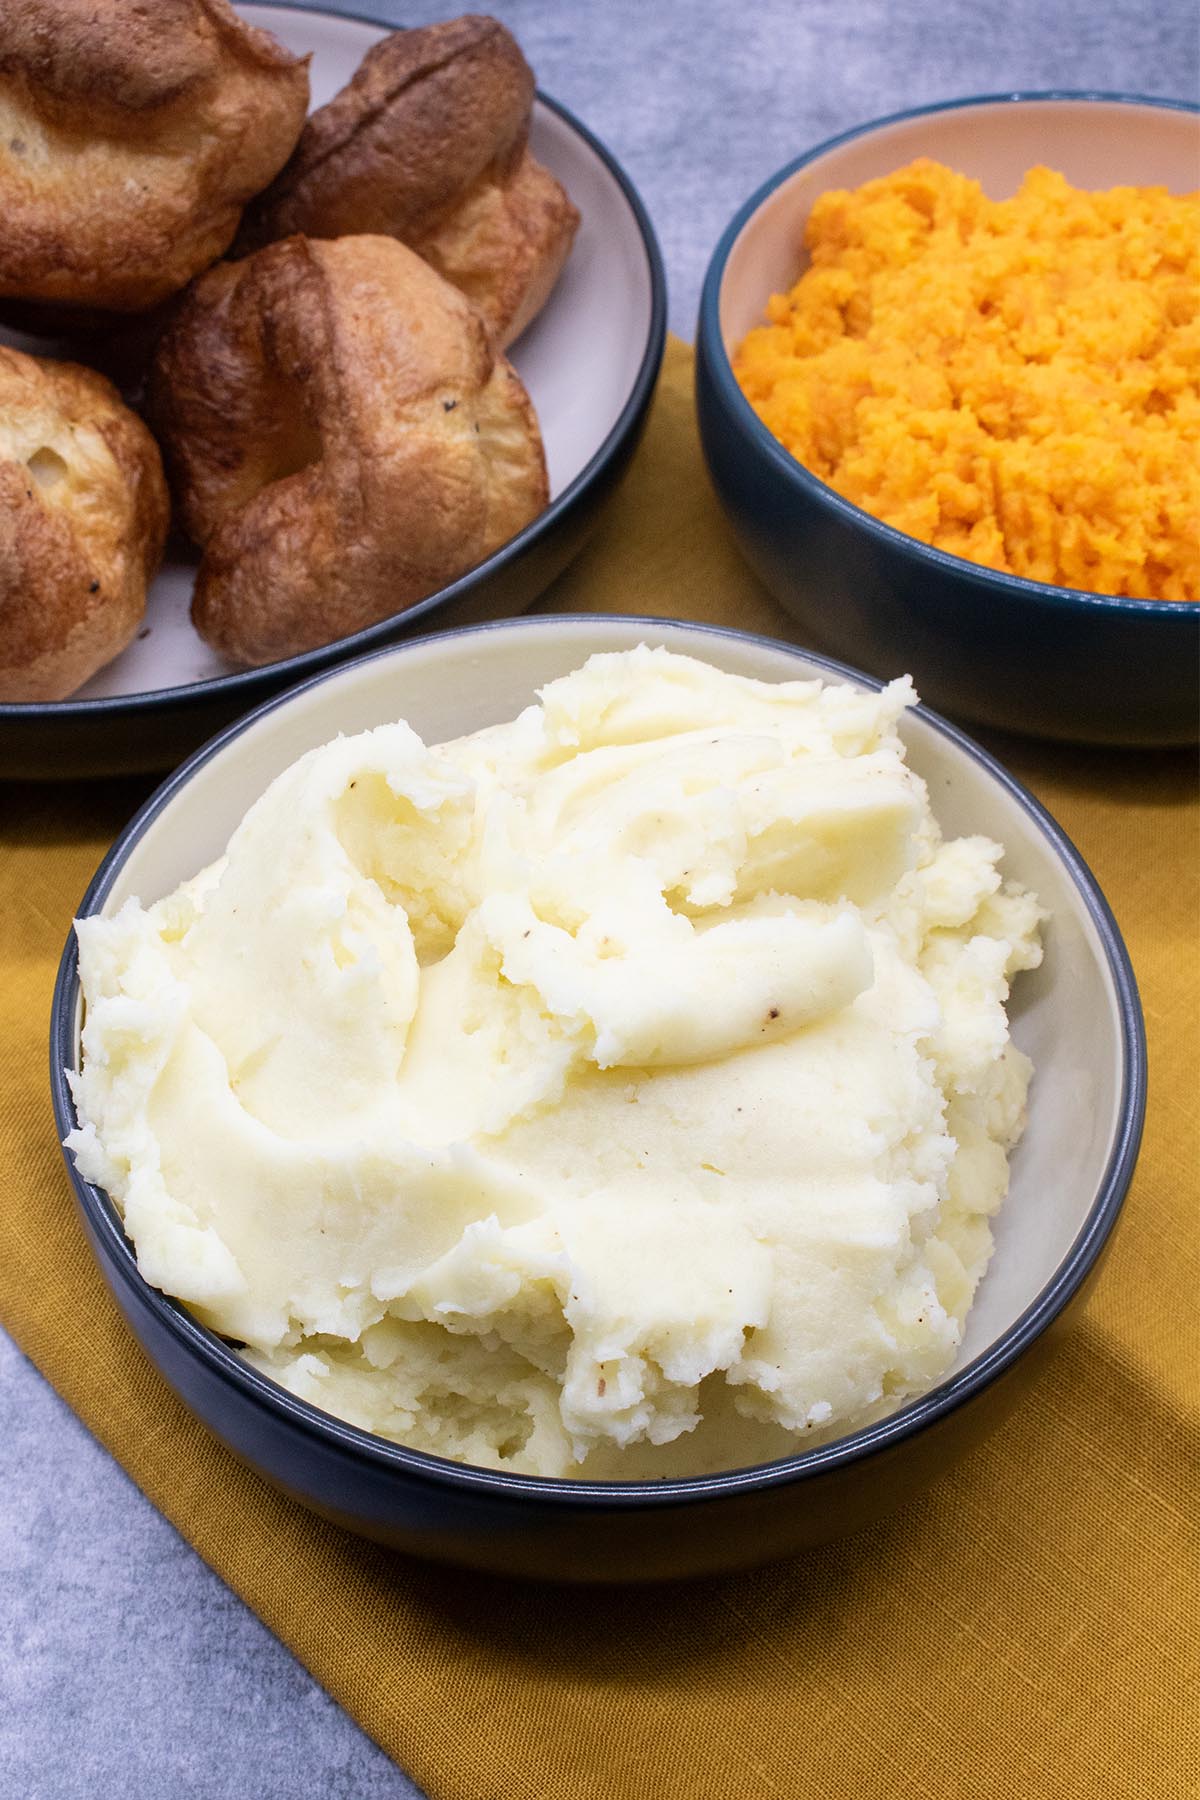 Mashed potatoes in a bowl with Yorkshire puddings and carrot and swede mash in background